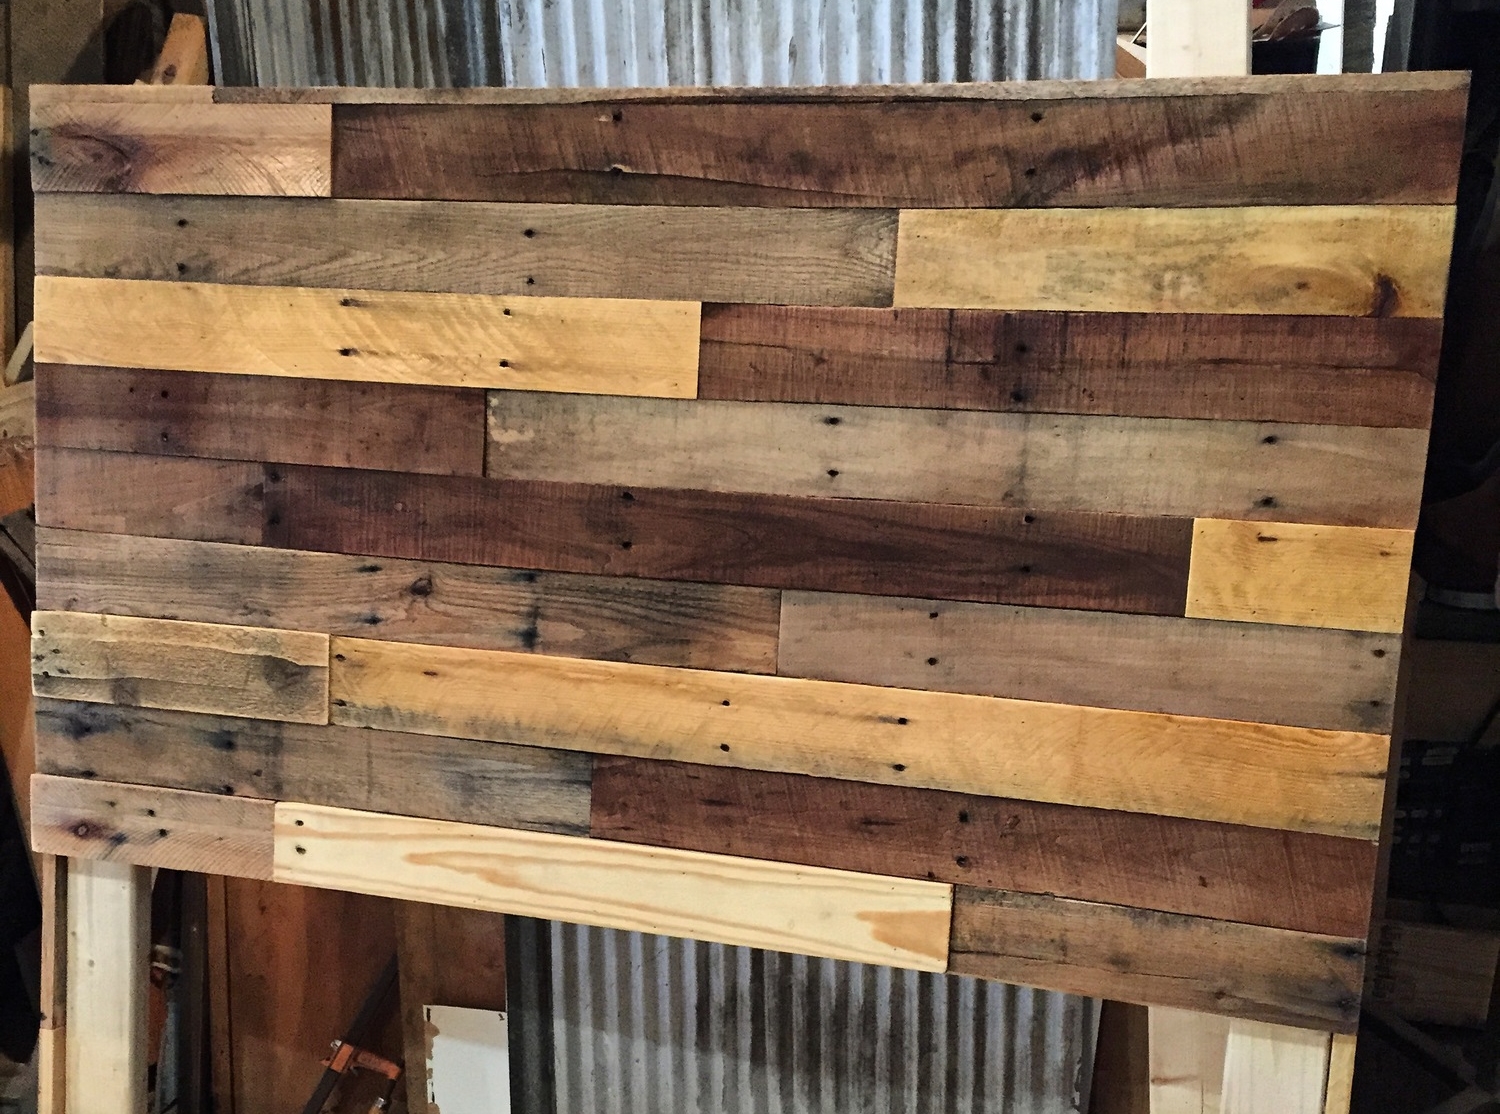 Pallet Wood Headboard Diy Revival, How To Build Bed Frame From Pallets